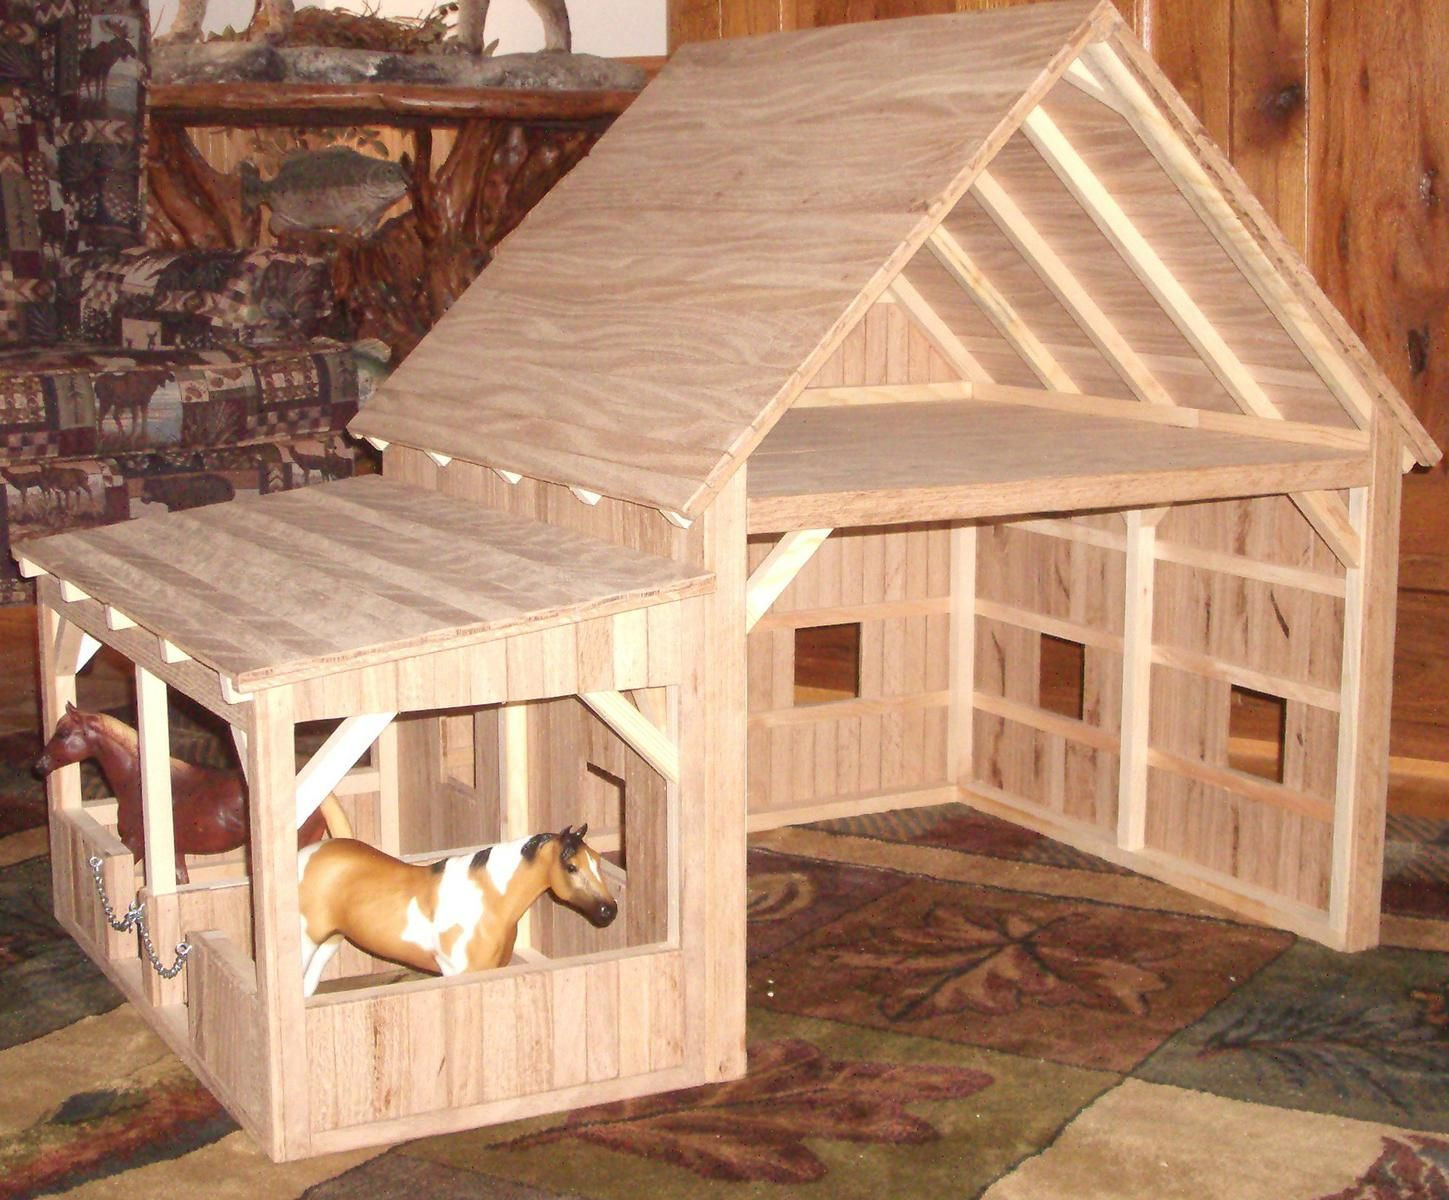 DIY Toy Barn Plans
 A nice easy to play in barn to model after Google Image